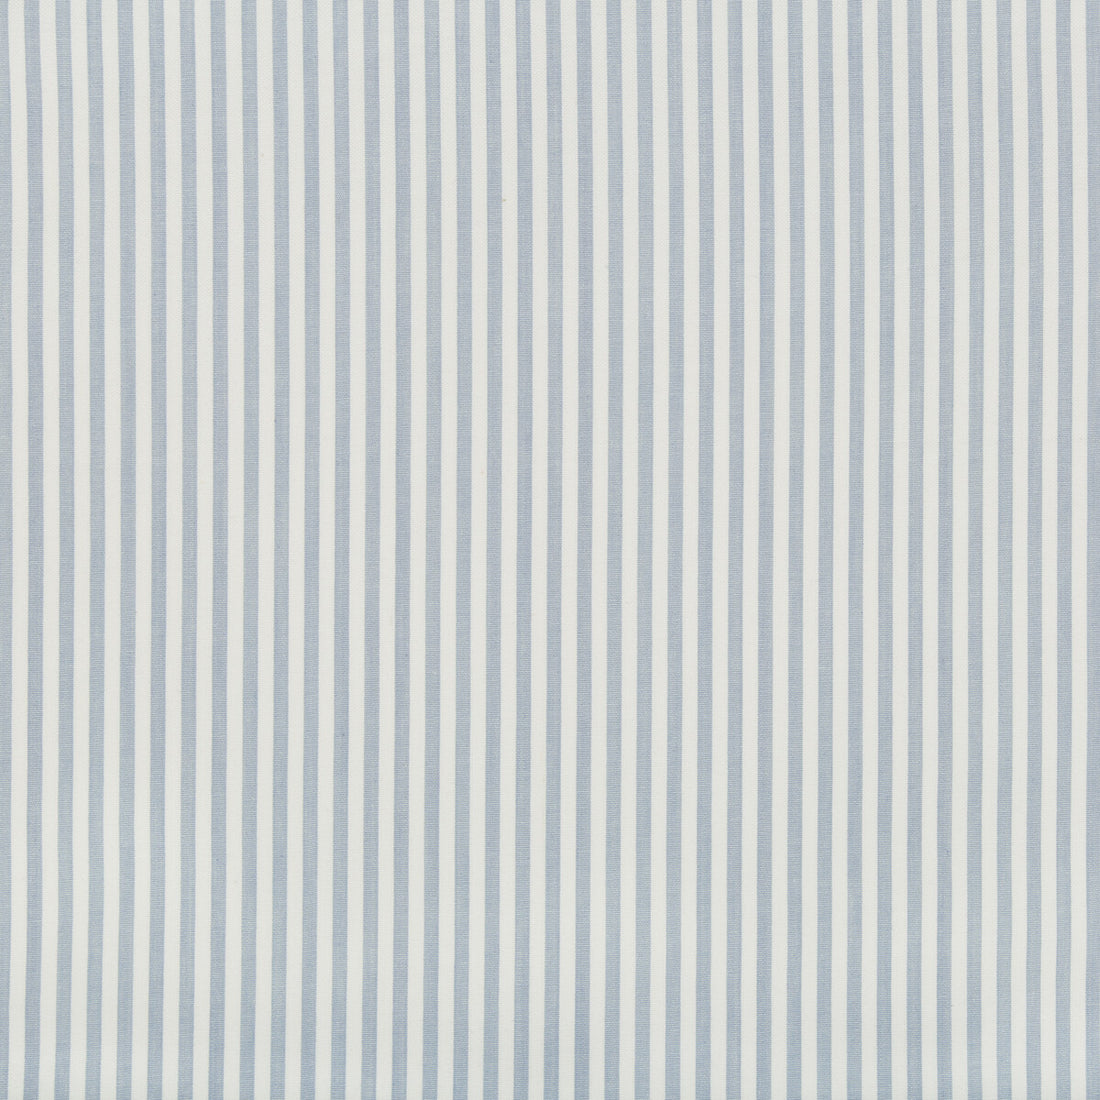 Cap Ferrat Stripe fabric in sky color - pattern 2018146.115.0 - by Lee Jofa in the Suzanne Kasler The Riviera collection